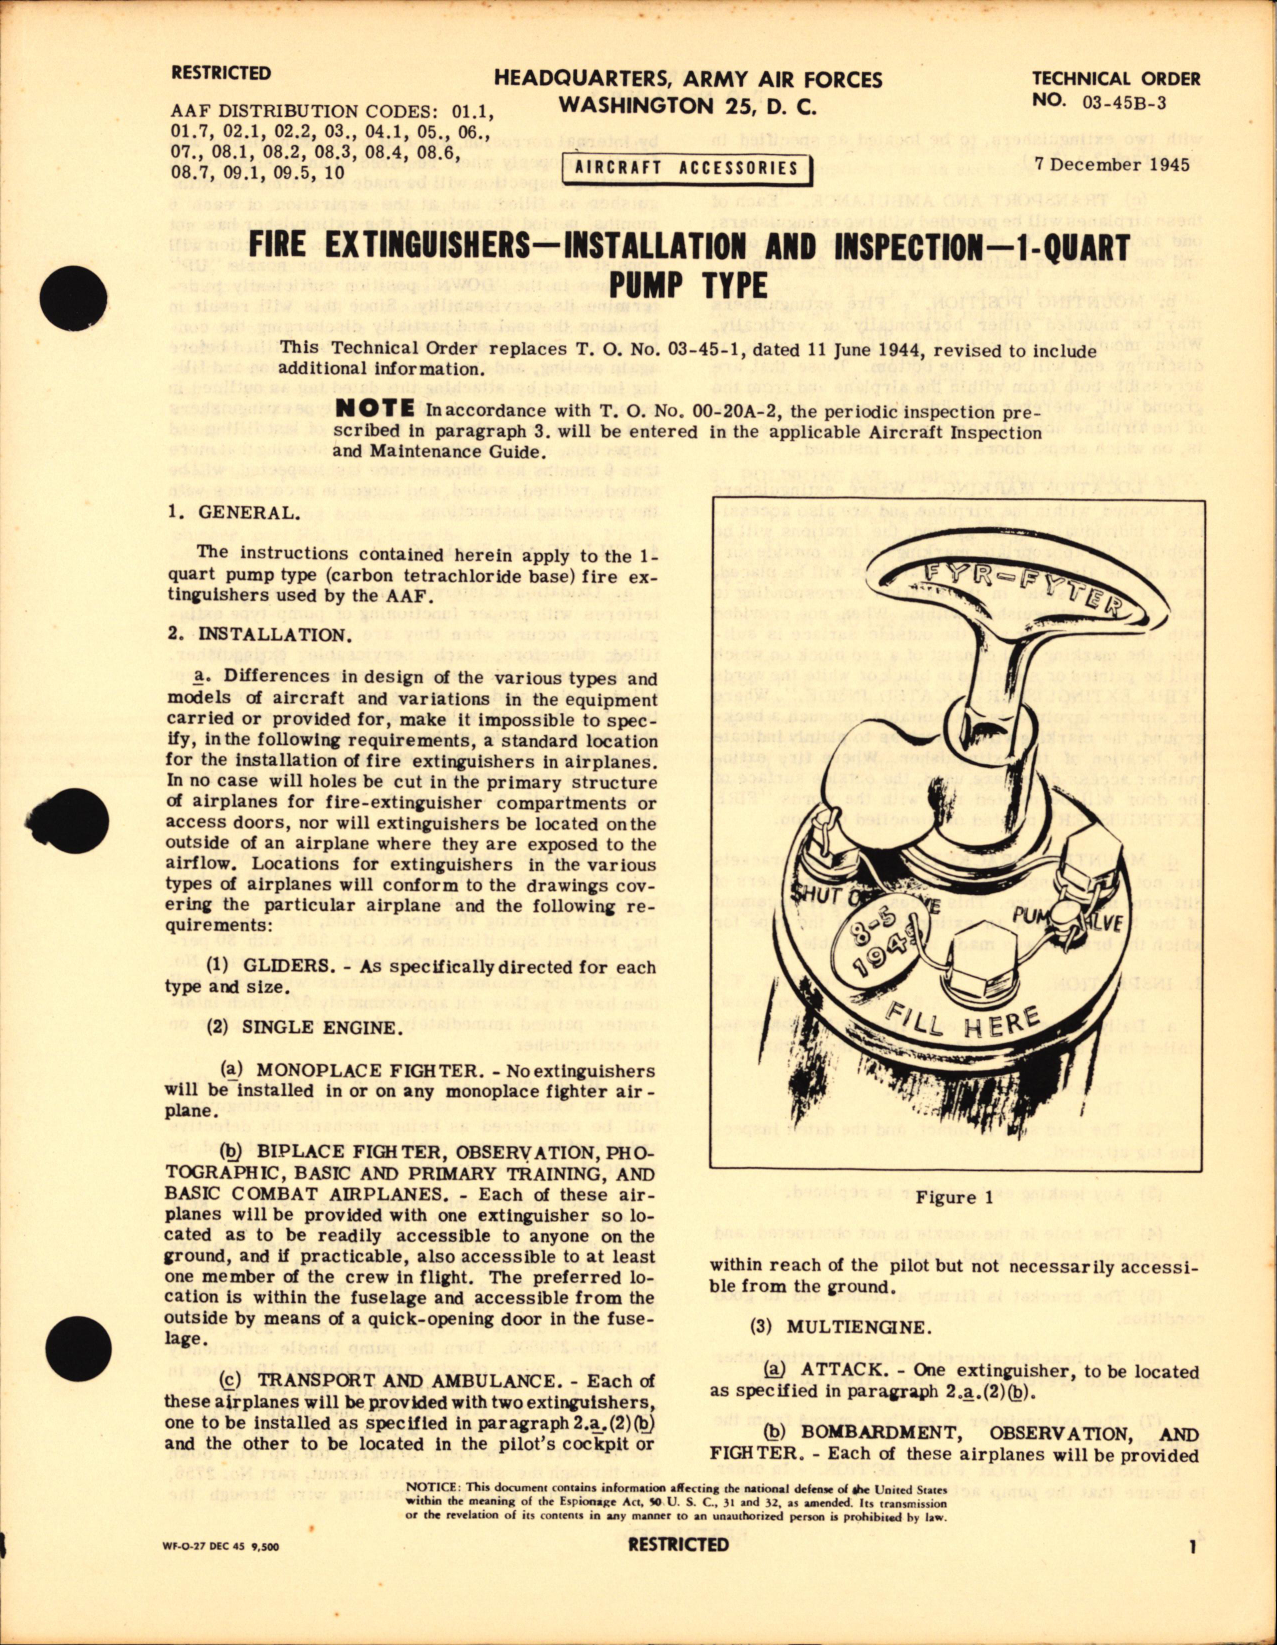 Sample page 1 from AirCorps Library document: Installation of Inspection of 1 Quart Pump Type Fire Extinguishers